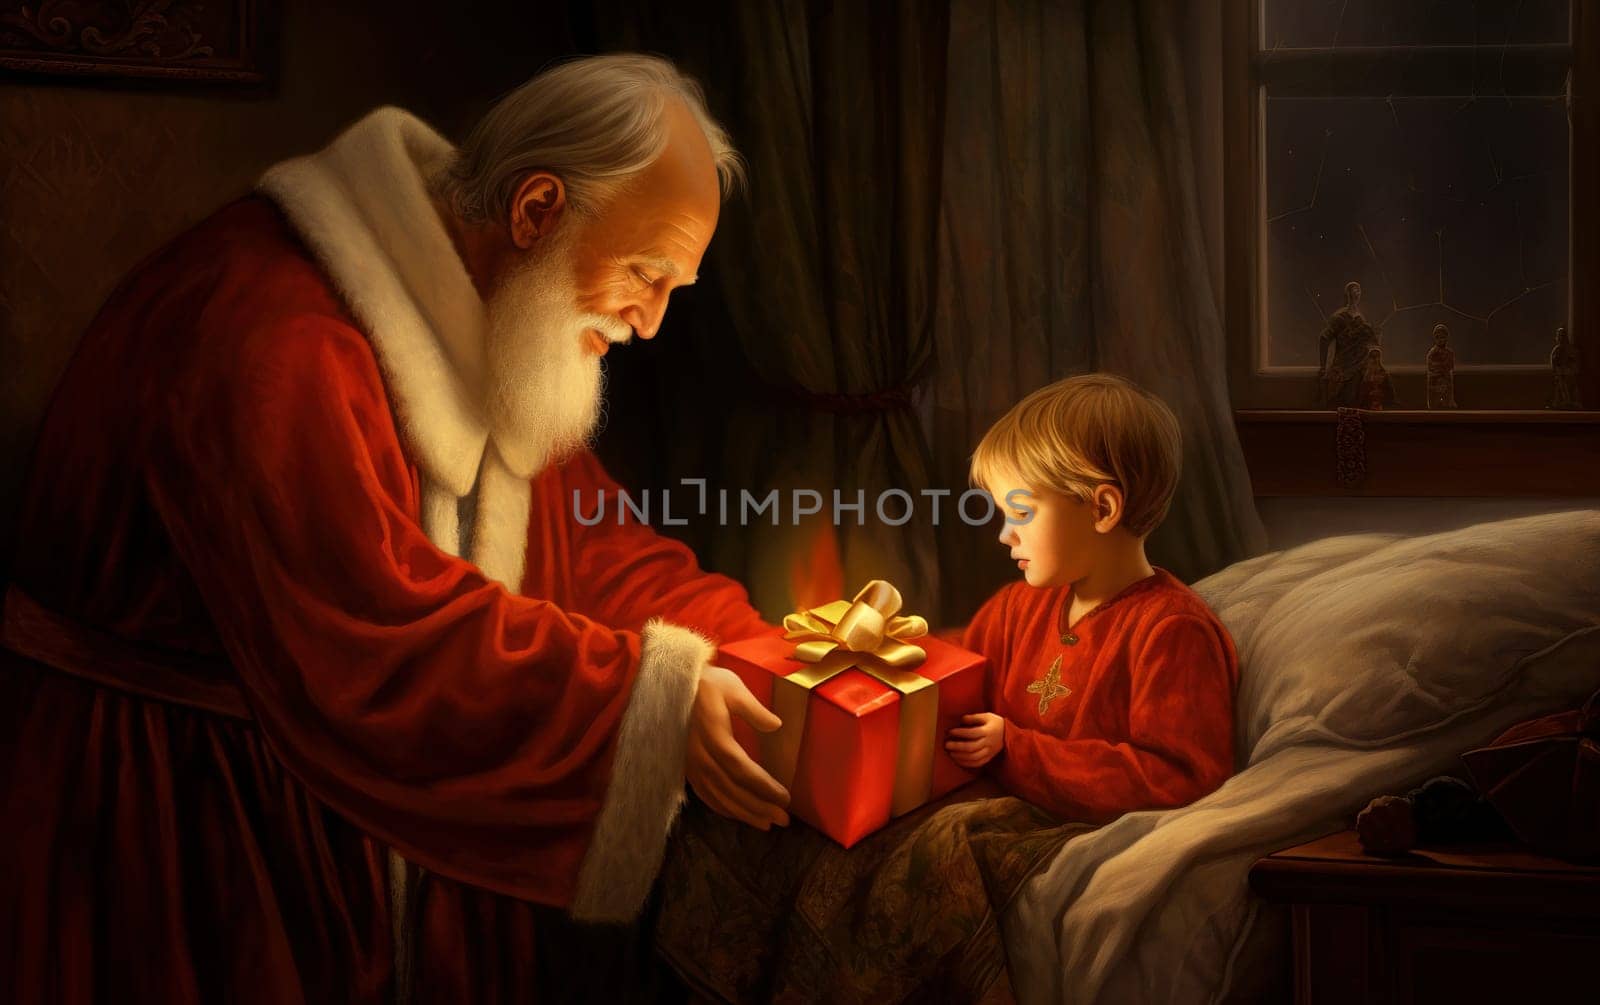 A little boy woke up on Christmas Eve night from a visit from St. Nicholas, who came to leave a gift. Christmas miracle, winter family holiday with Santa Claus, follower of Saint Nicholas AI